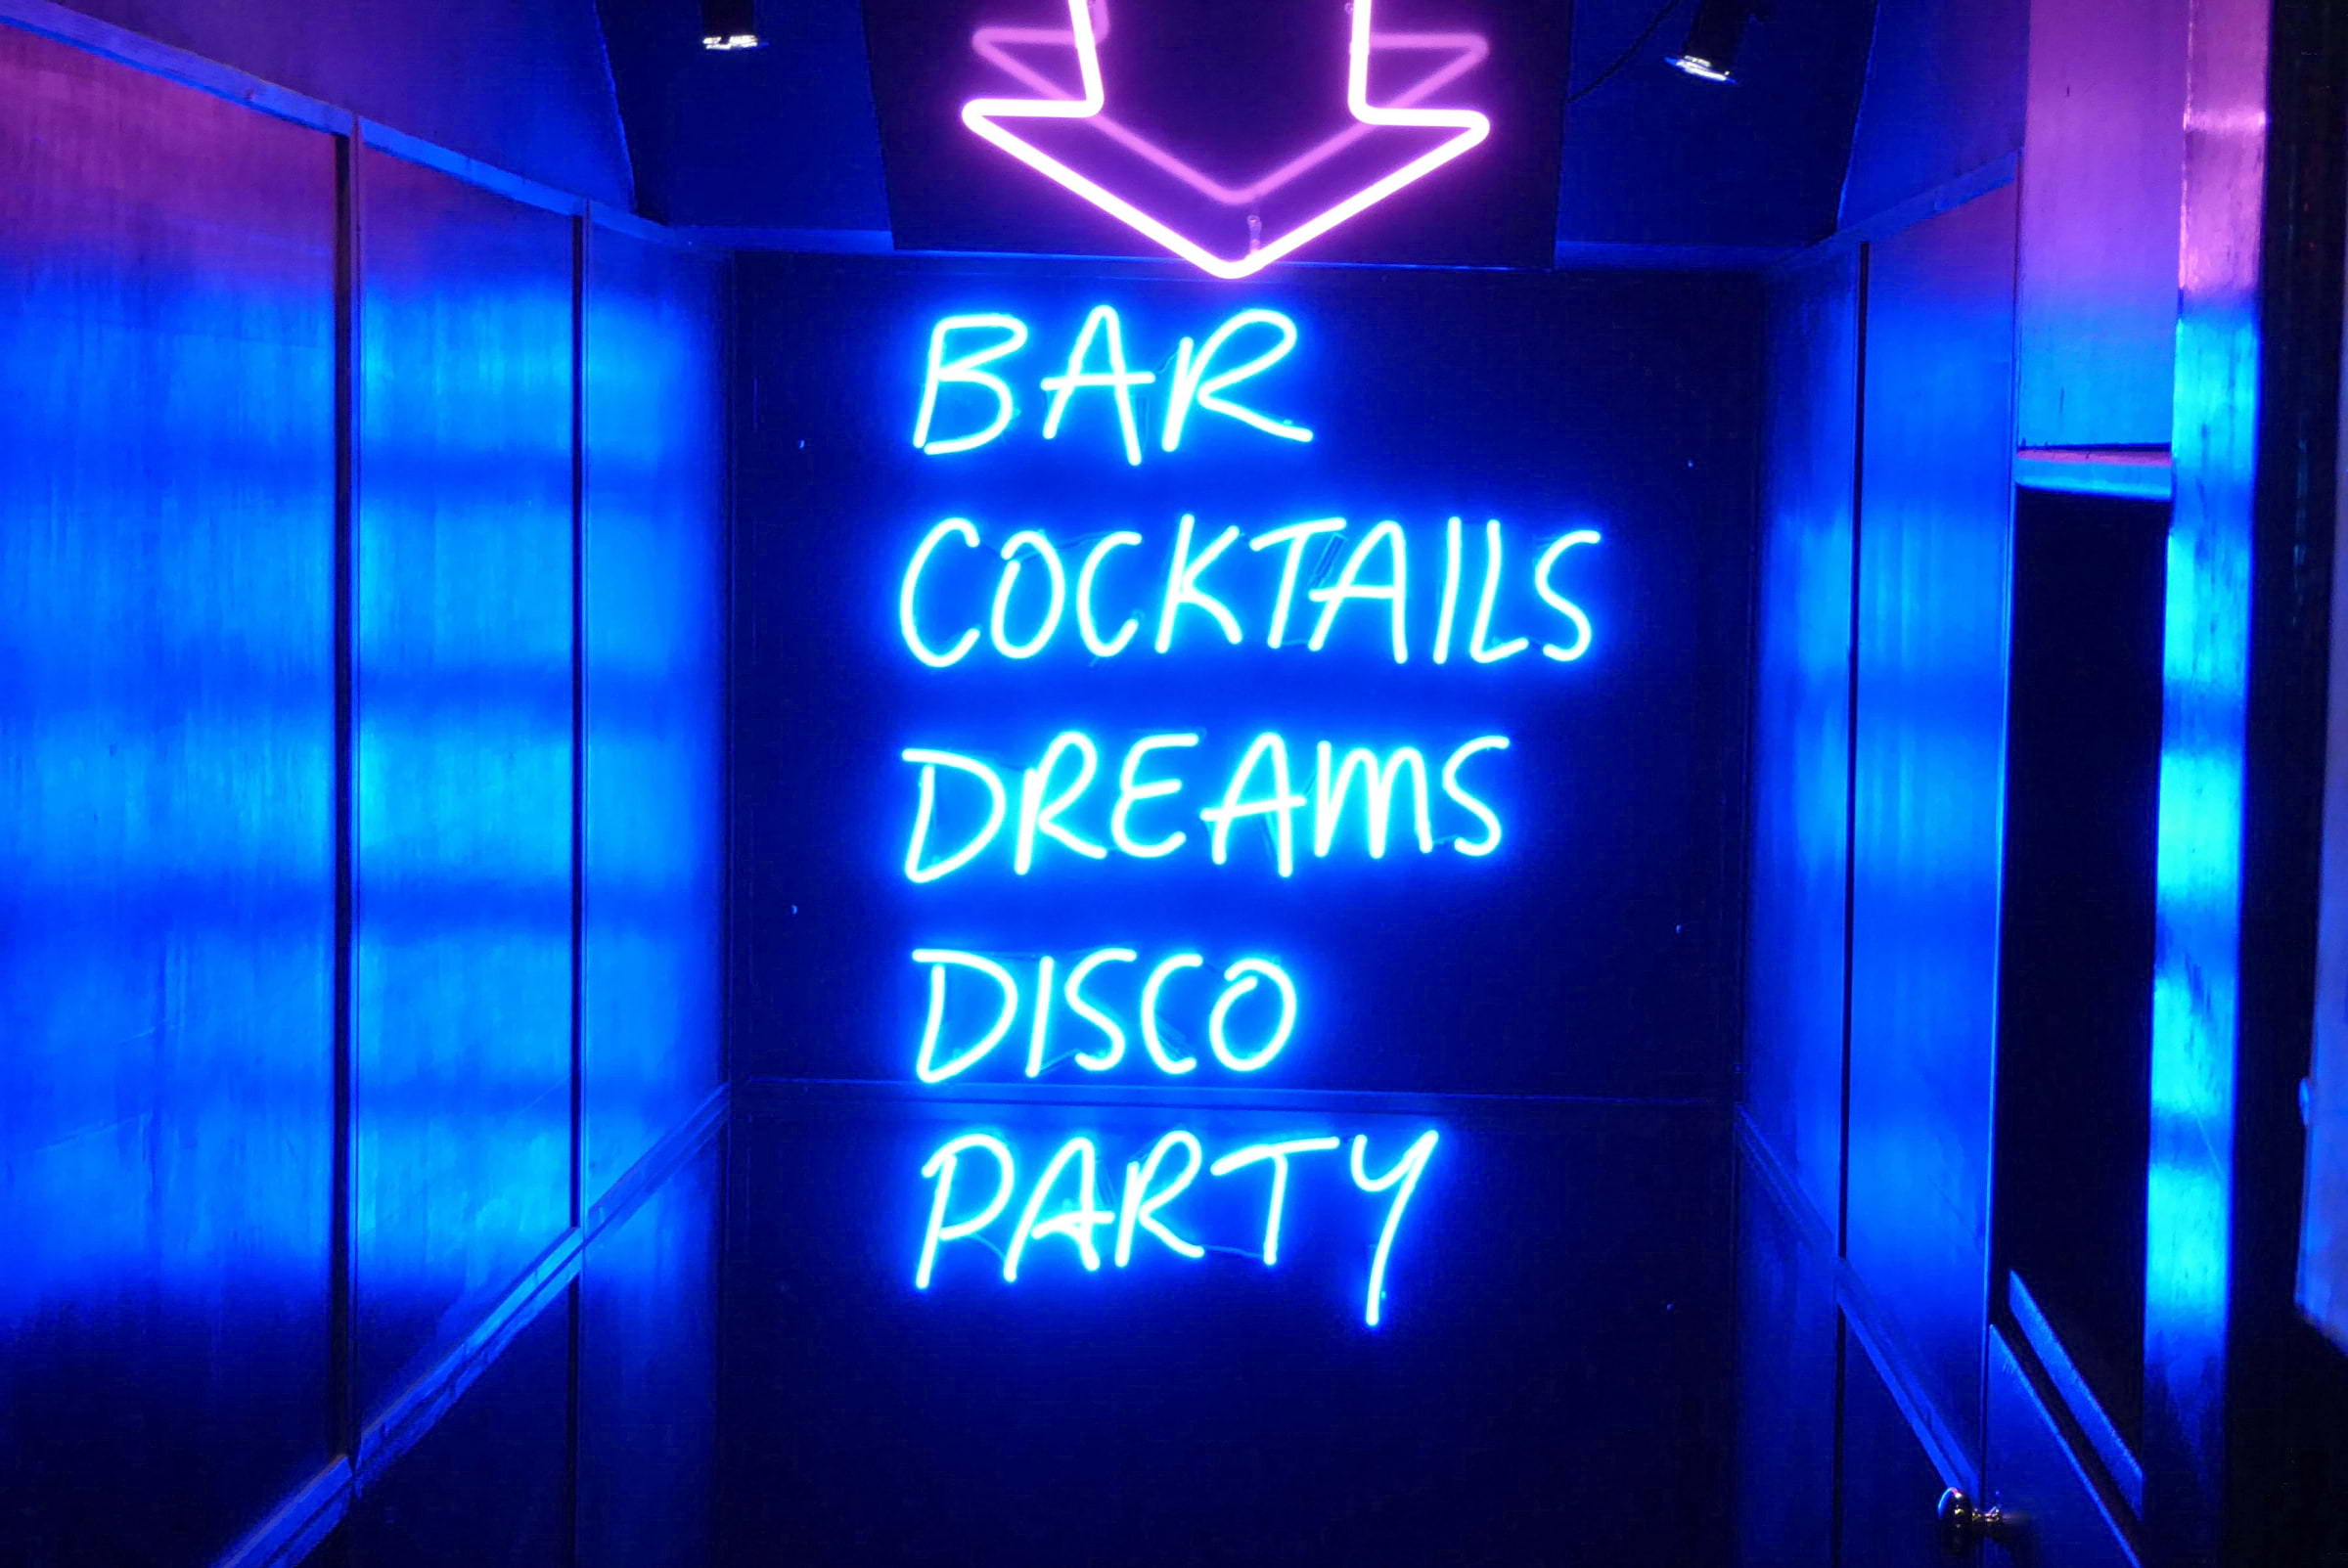 A neon sign pointing downstairs in a bar